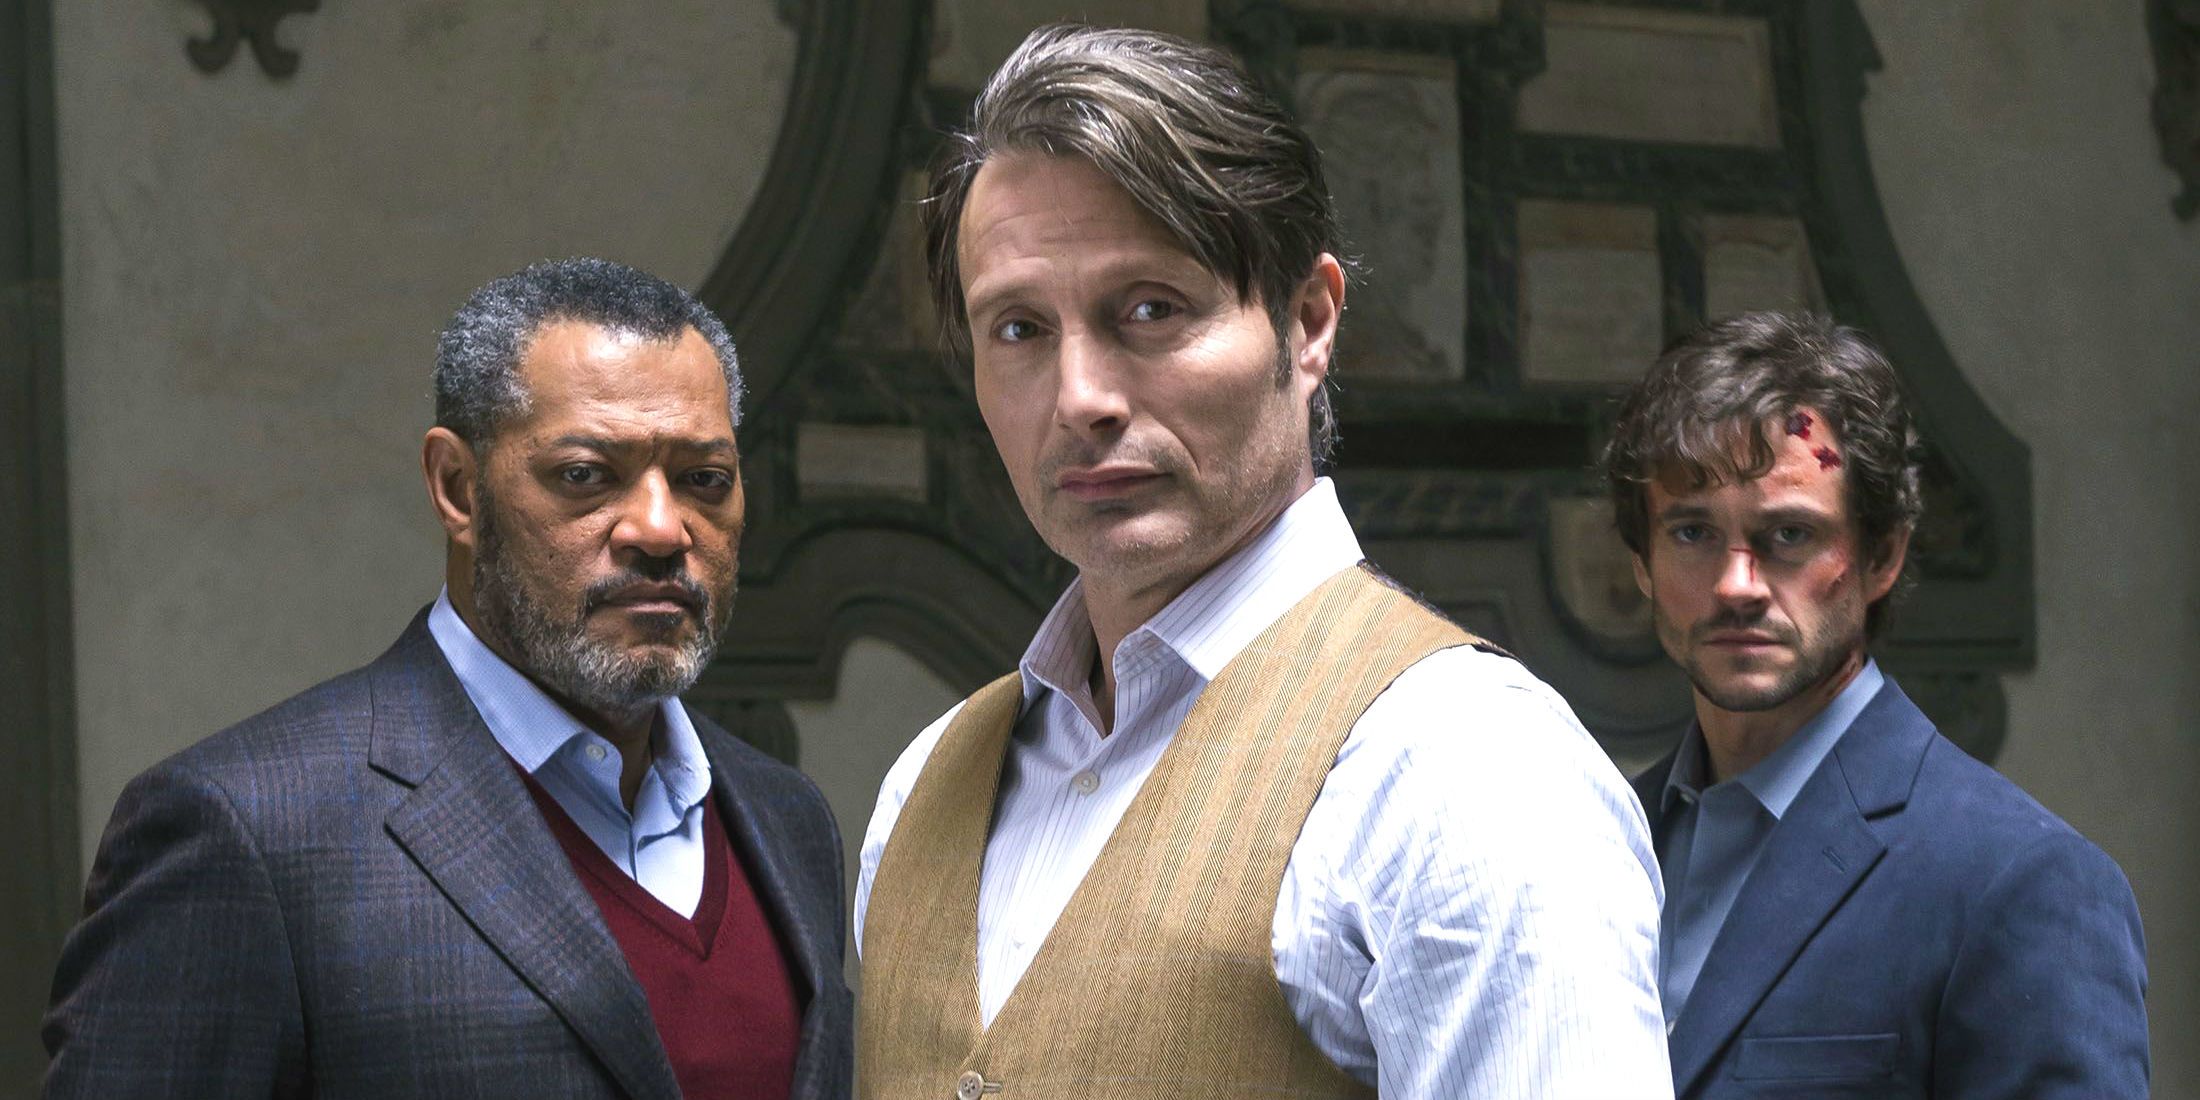 Hannibal Season 4 Discussions Influenced By Show’s Netflix Popularity